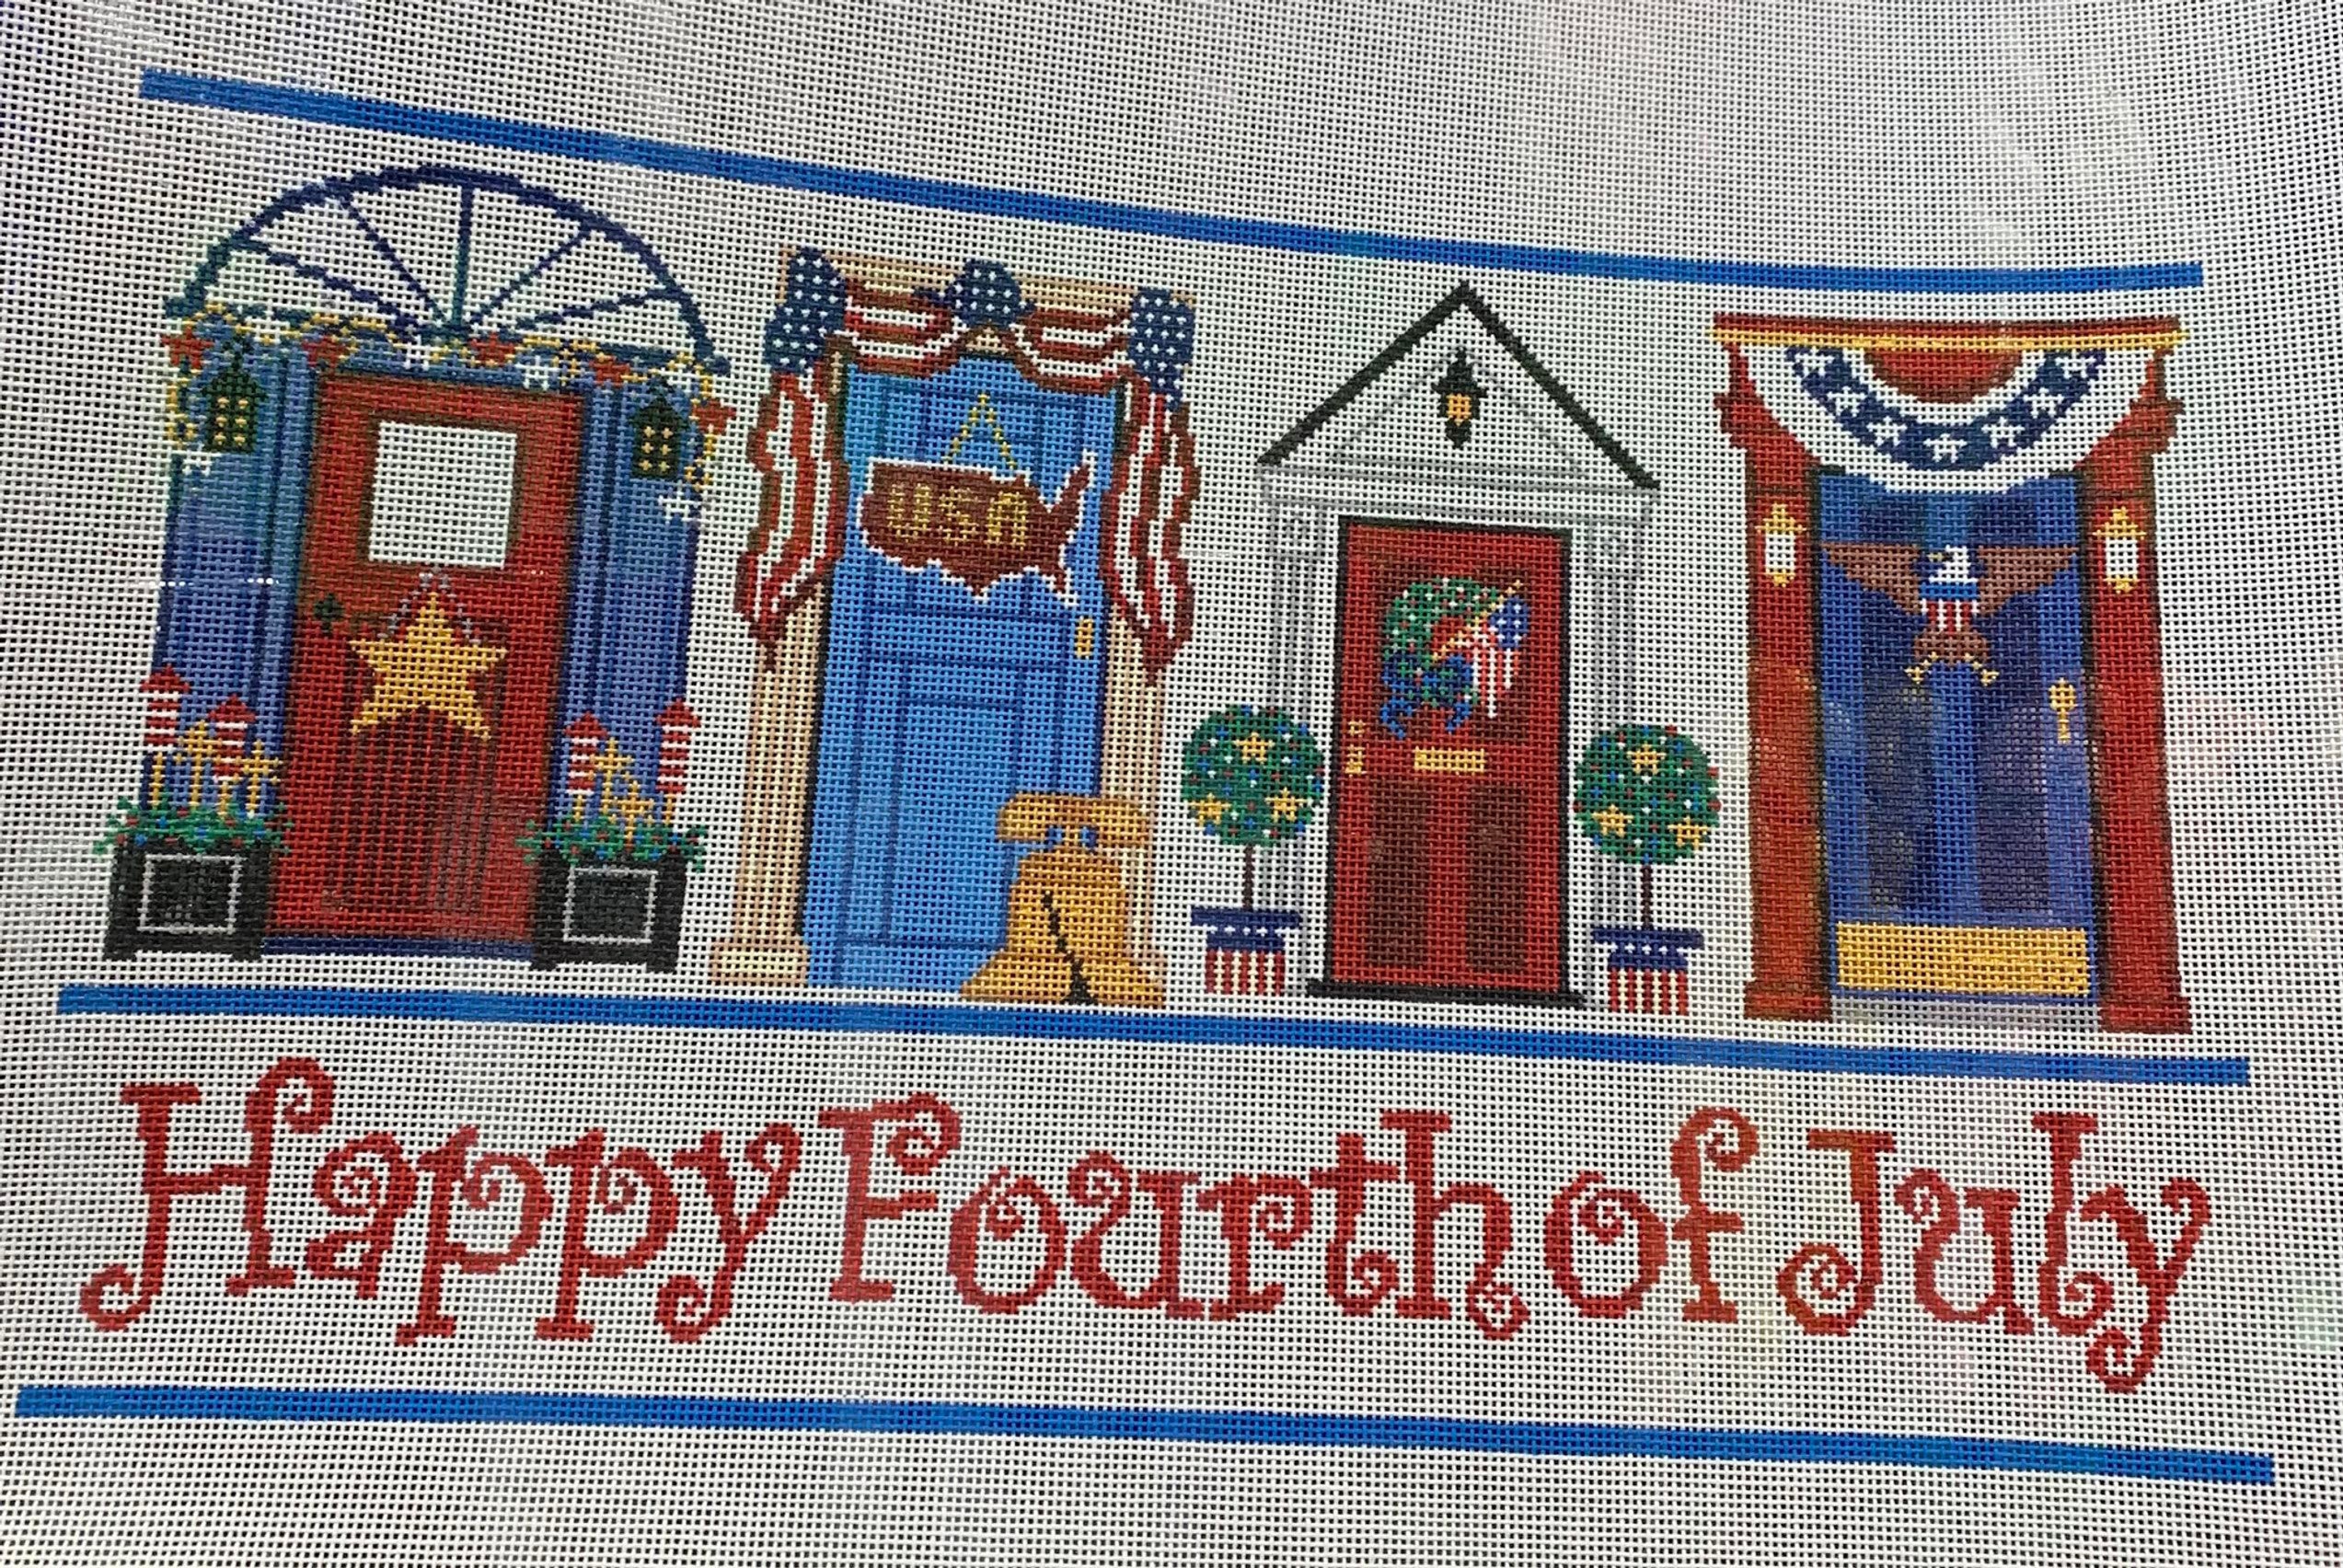 Meredith Collection S-190i Patriotic Doors STITCH GUIDE only